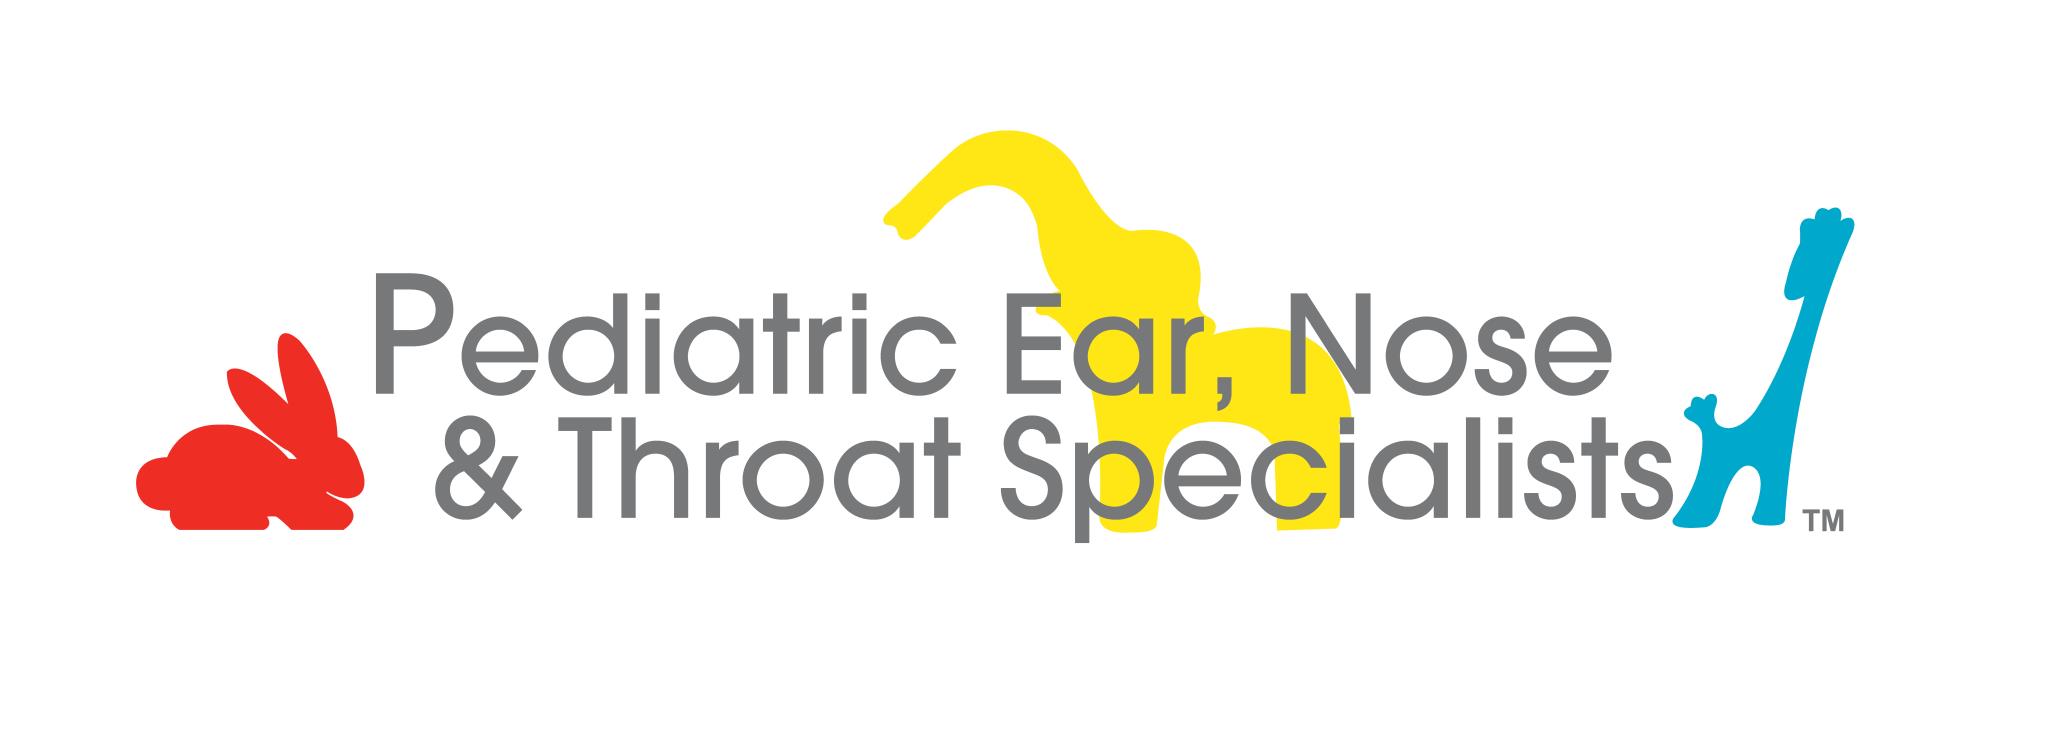 Pediatric Ear, Nose & Throat Specialists